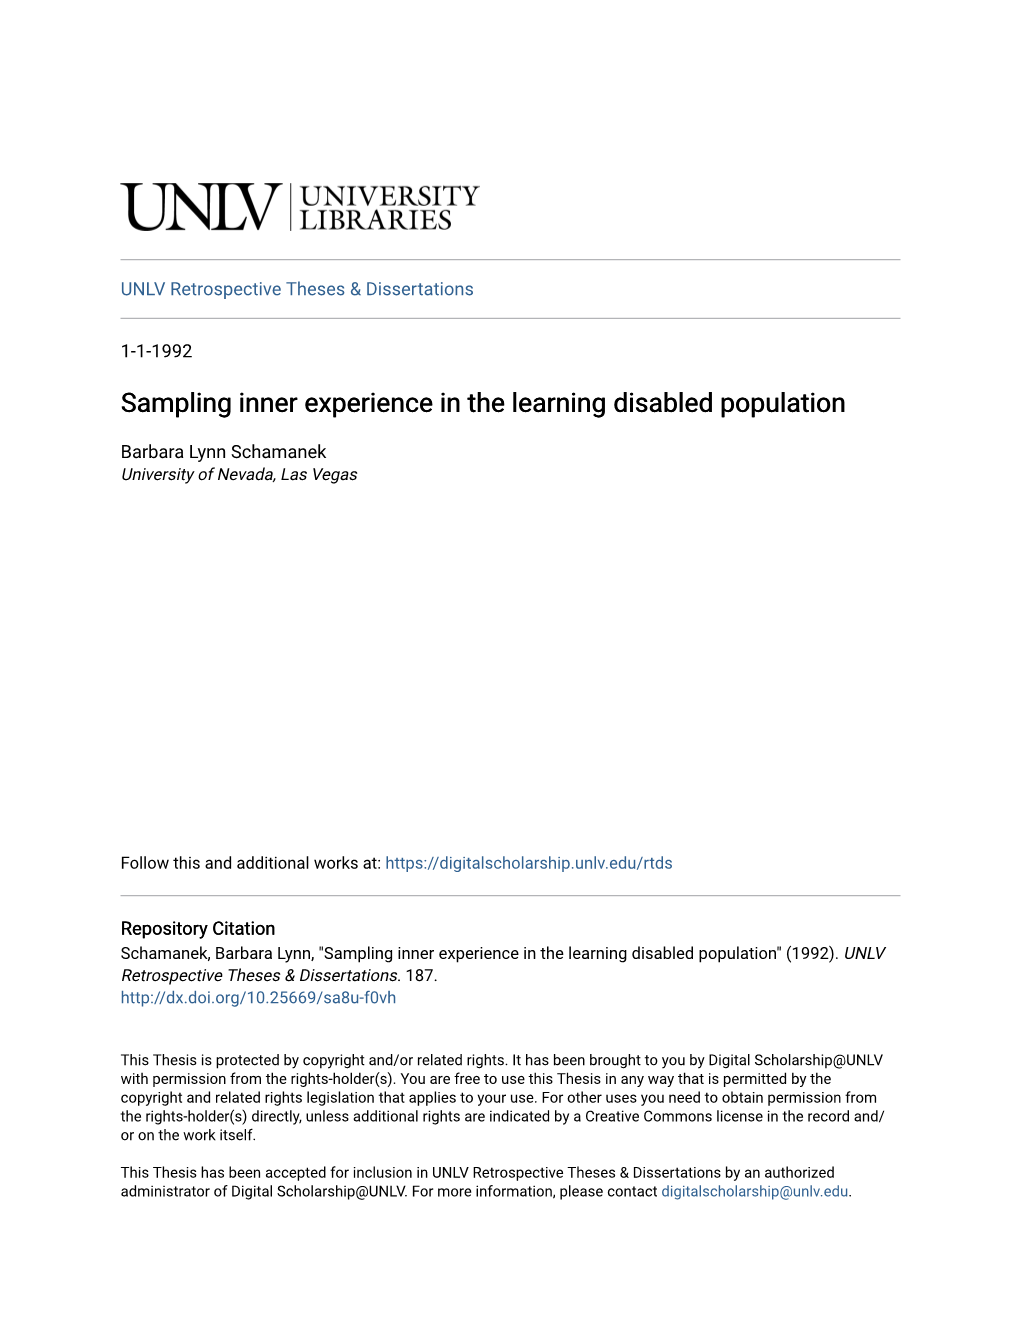 Sampling Inner Experience in the Learning Disabled Population